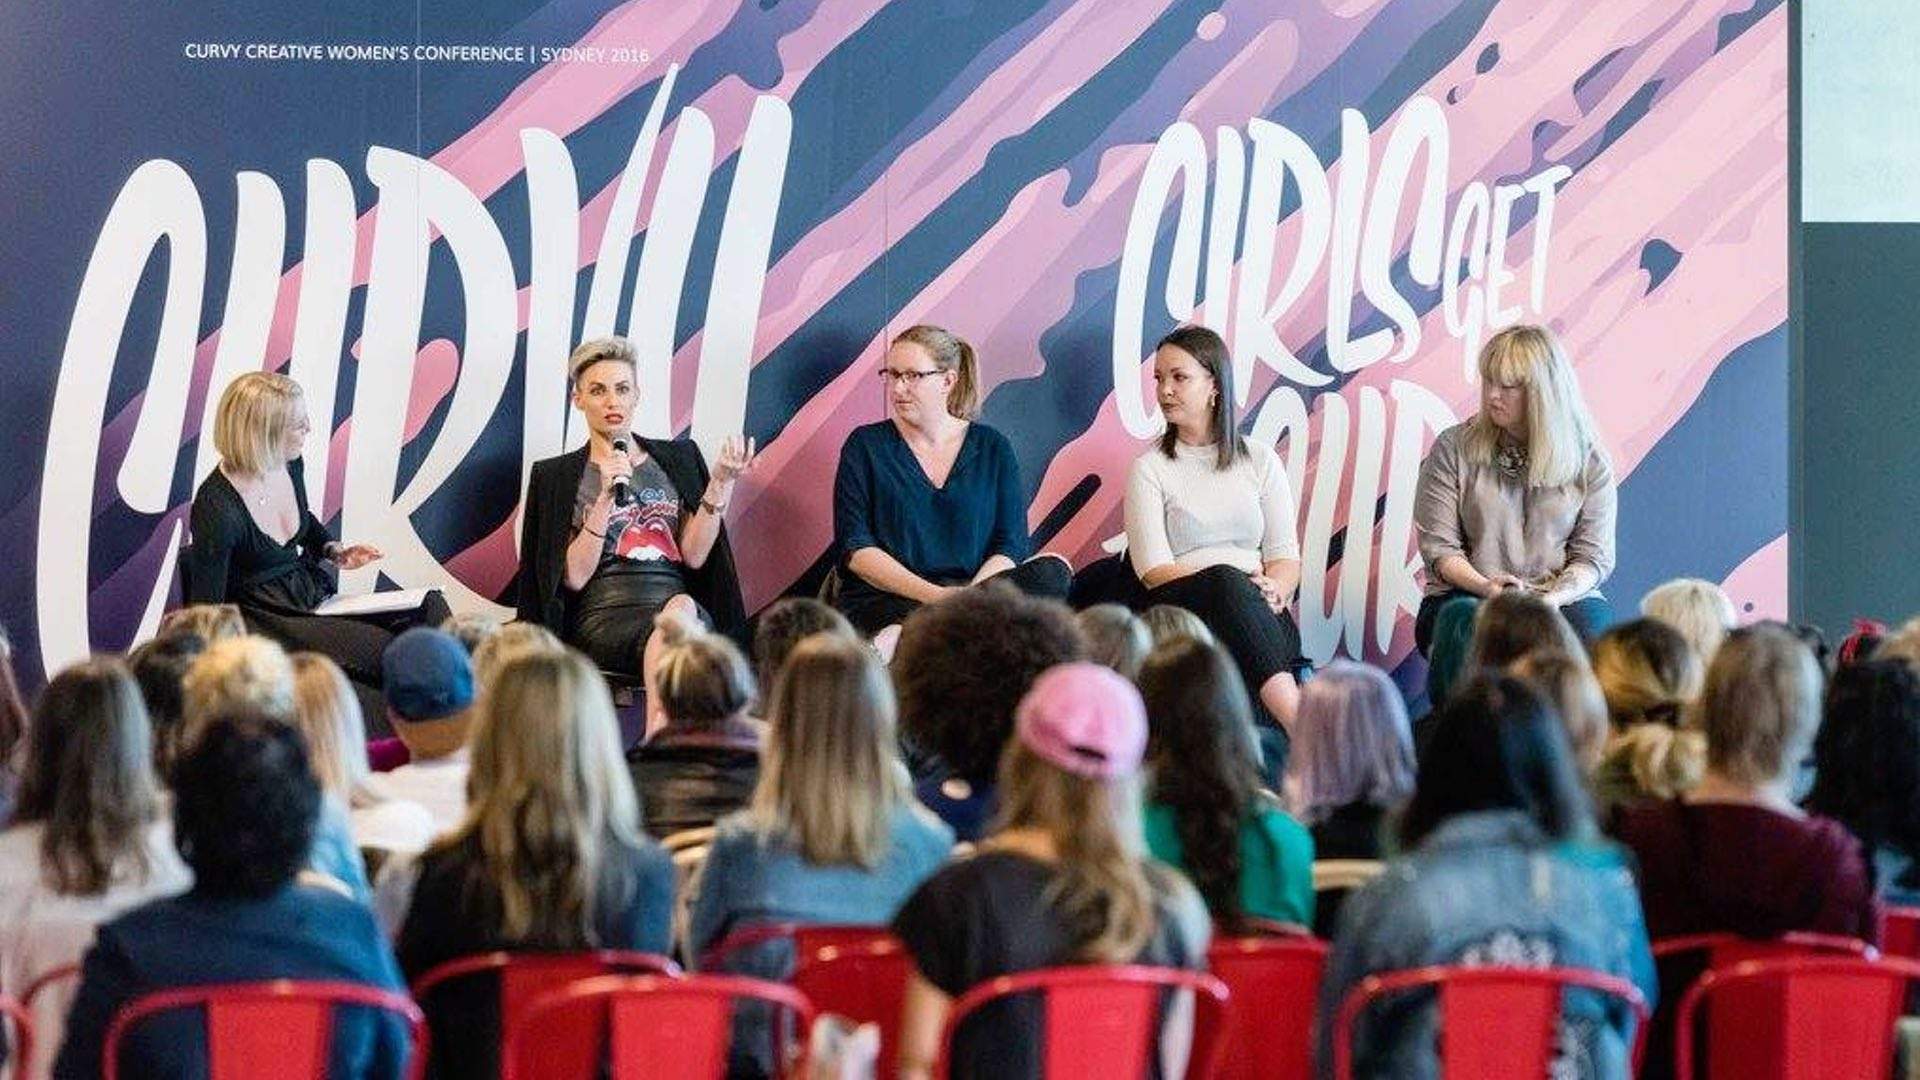 Curvy Creative Women's Conference 2018